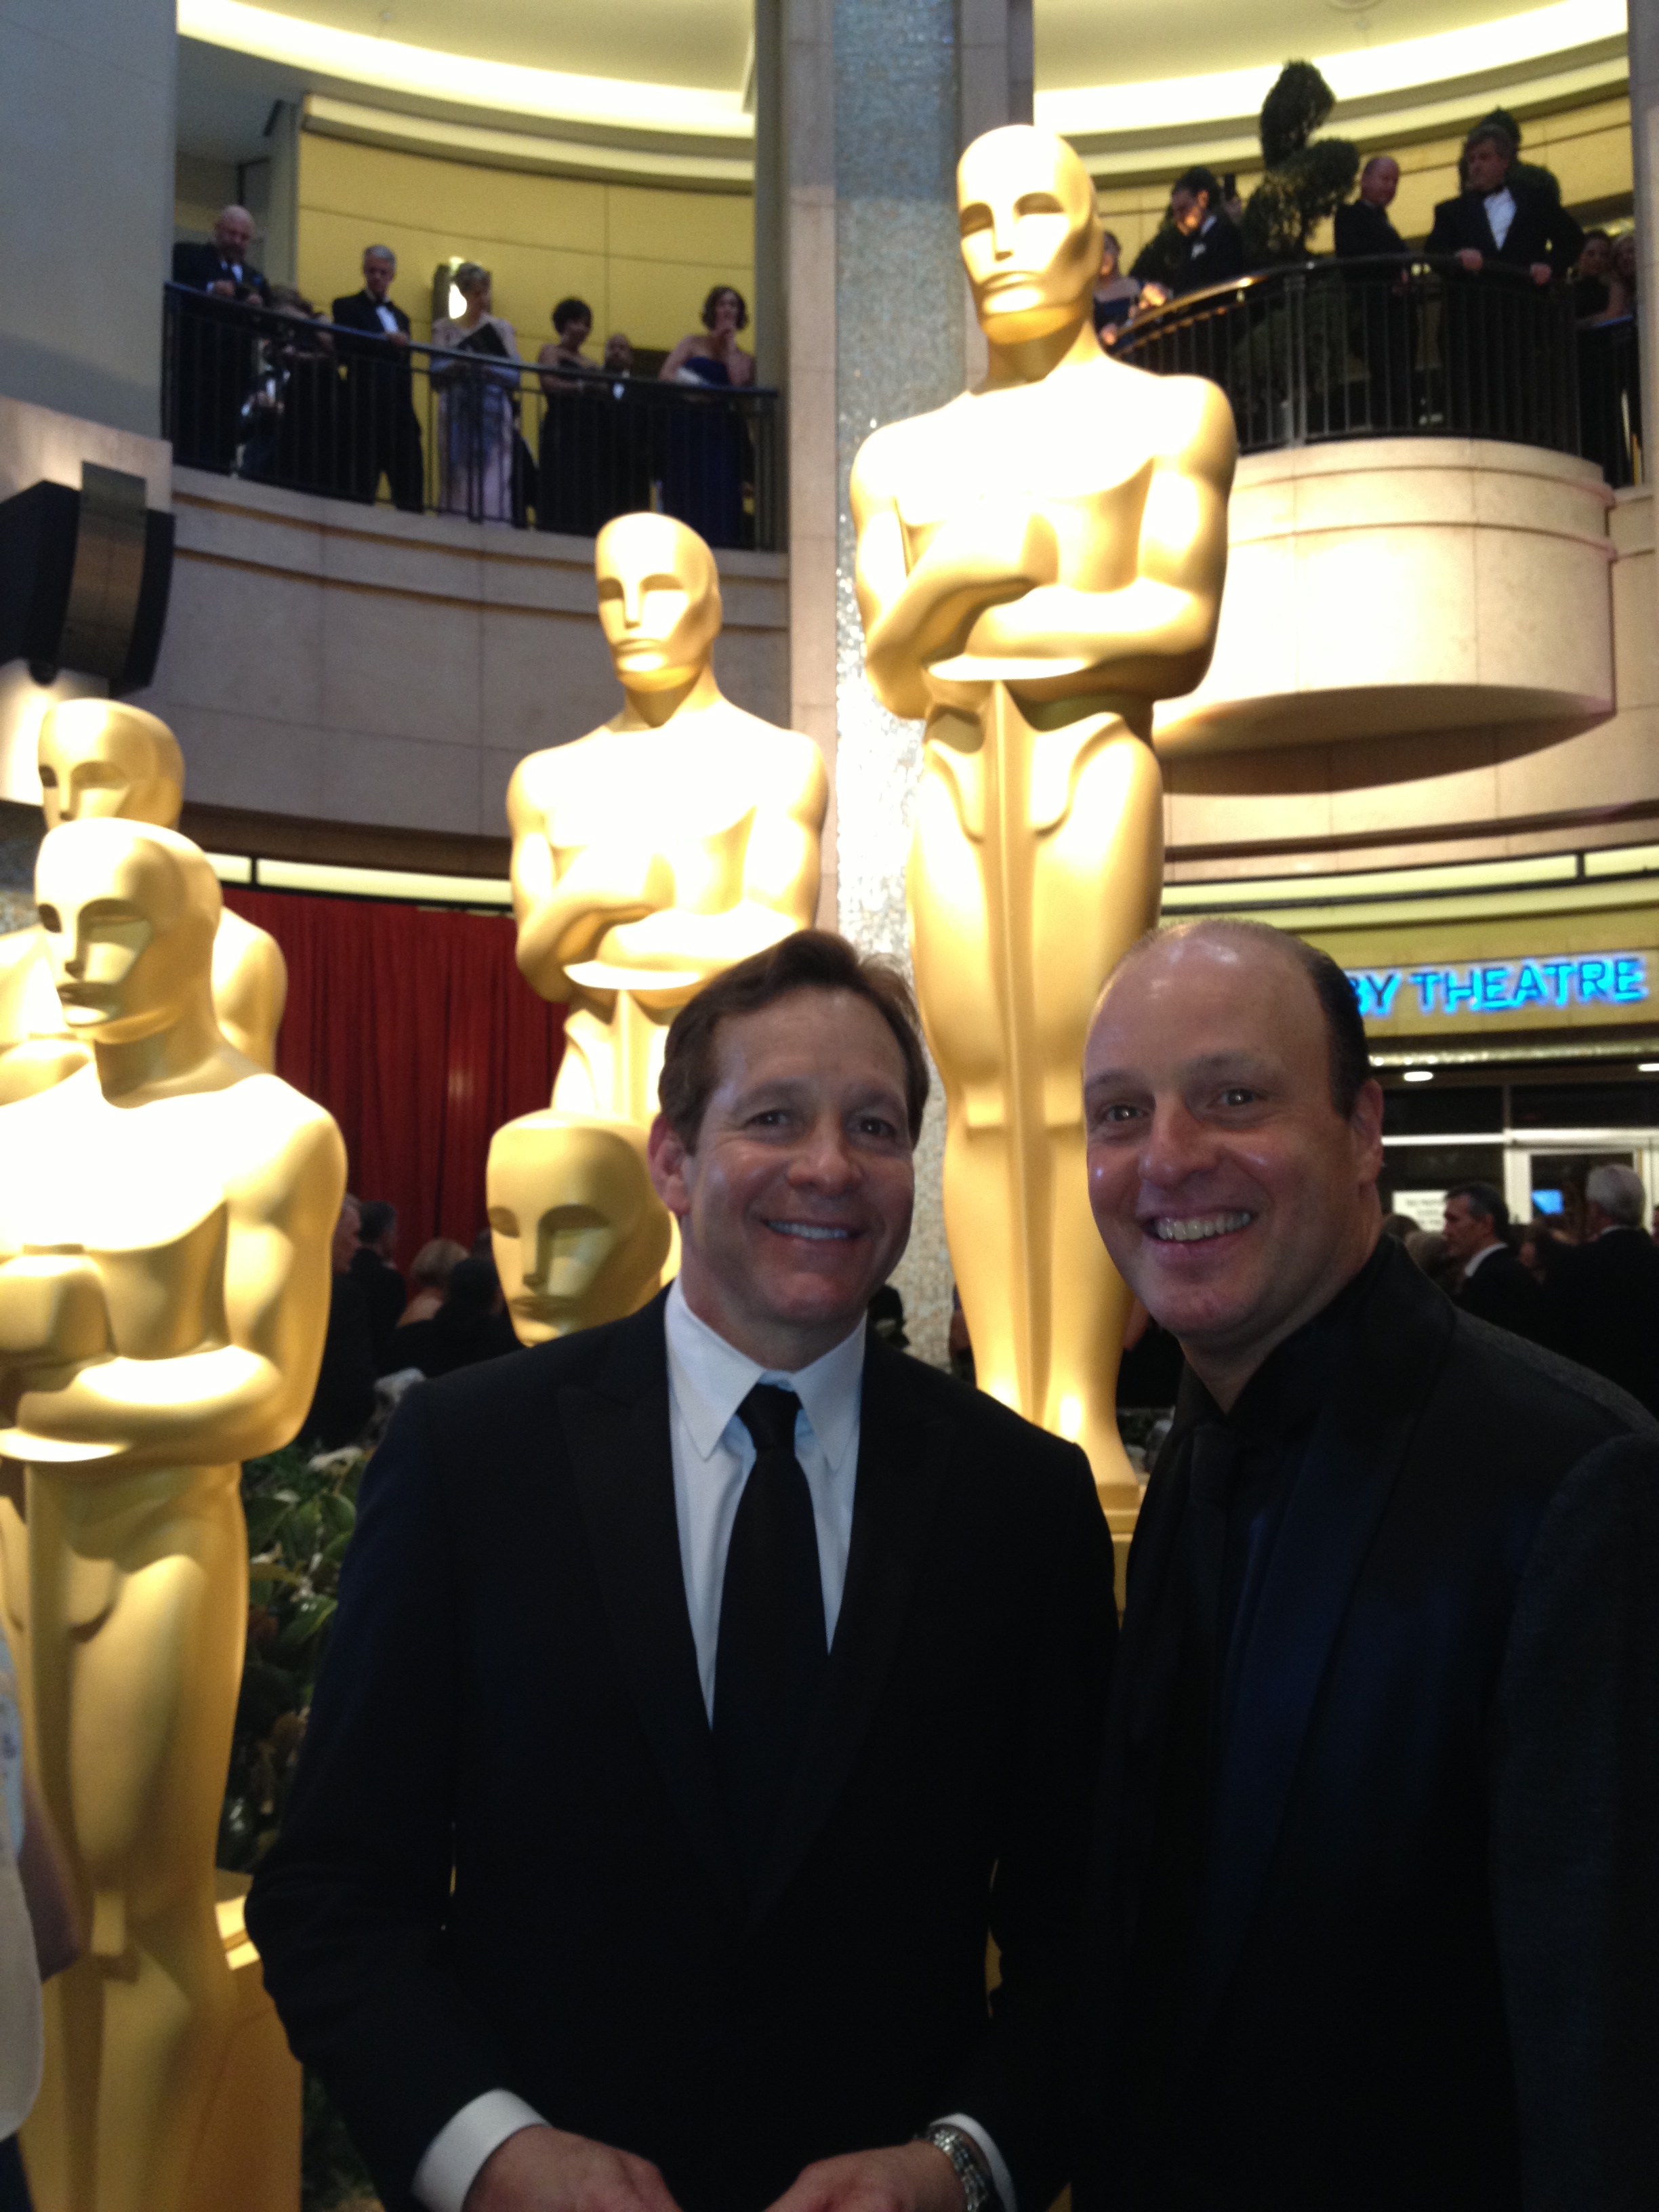 Producer Morris S. Levy and Steve Guttenberg at the 2013 Academy Awards.